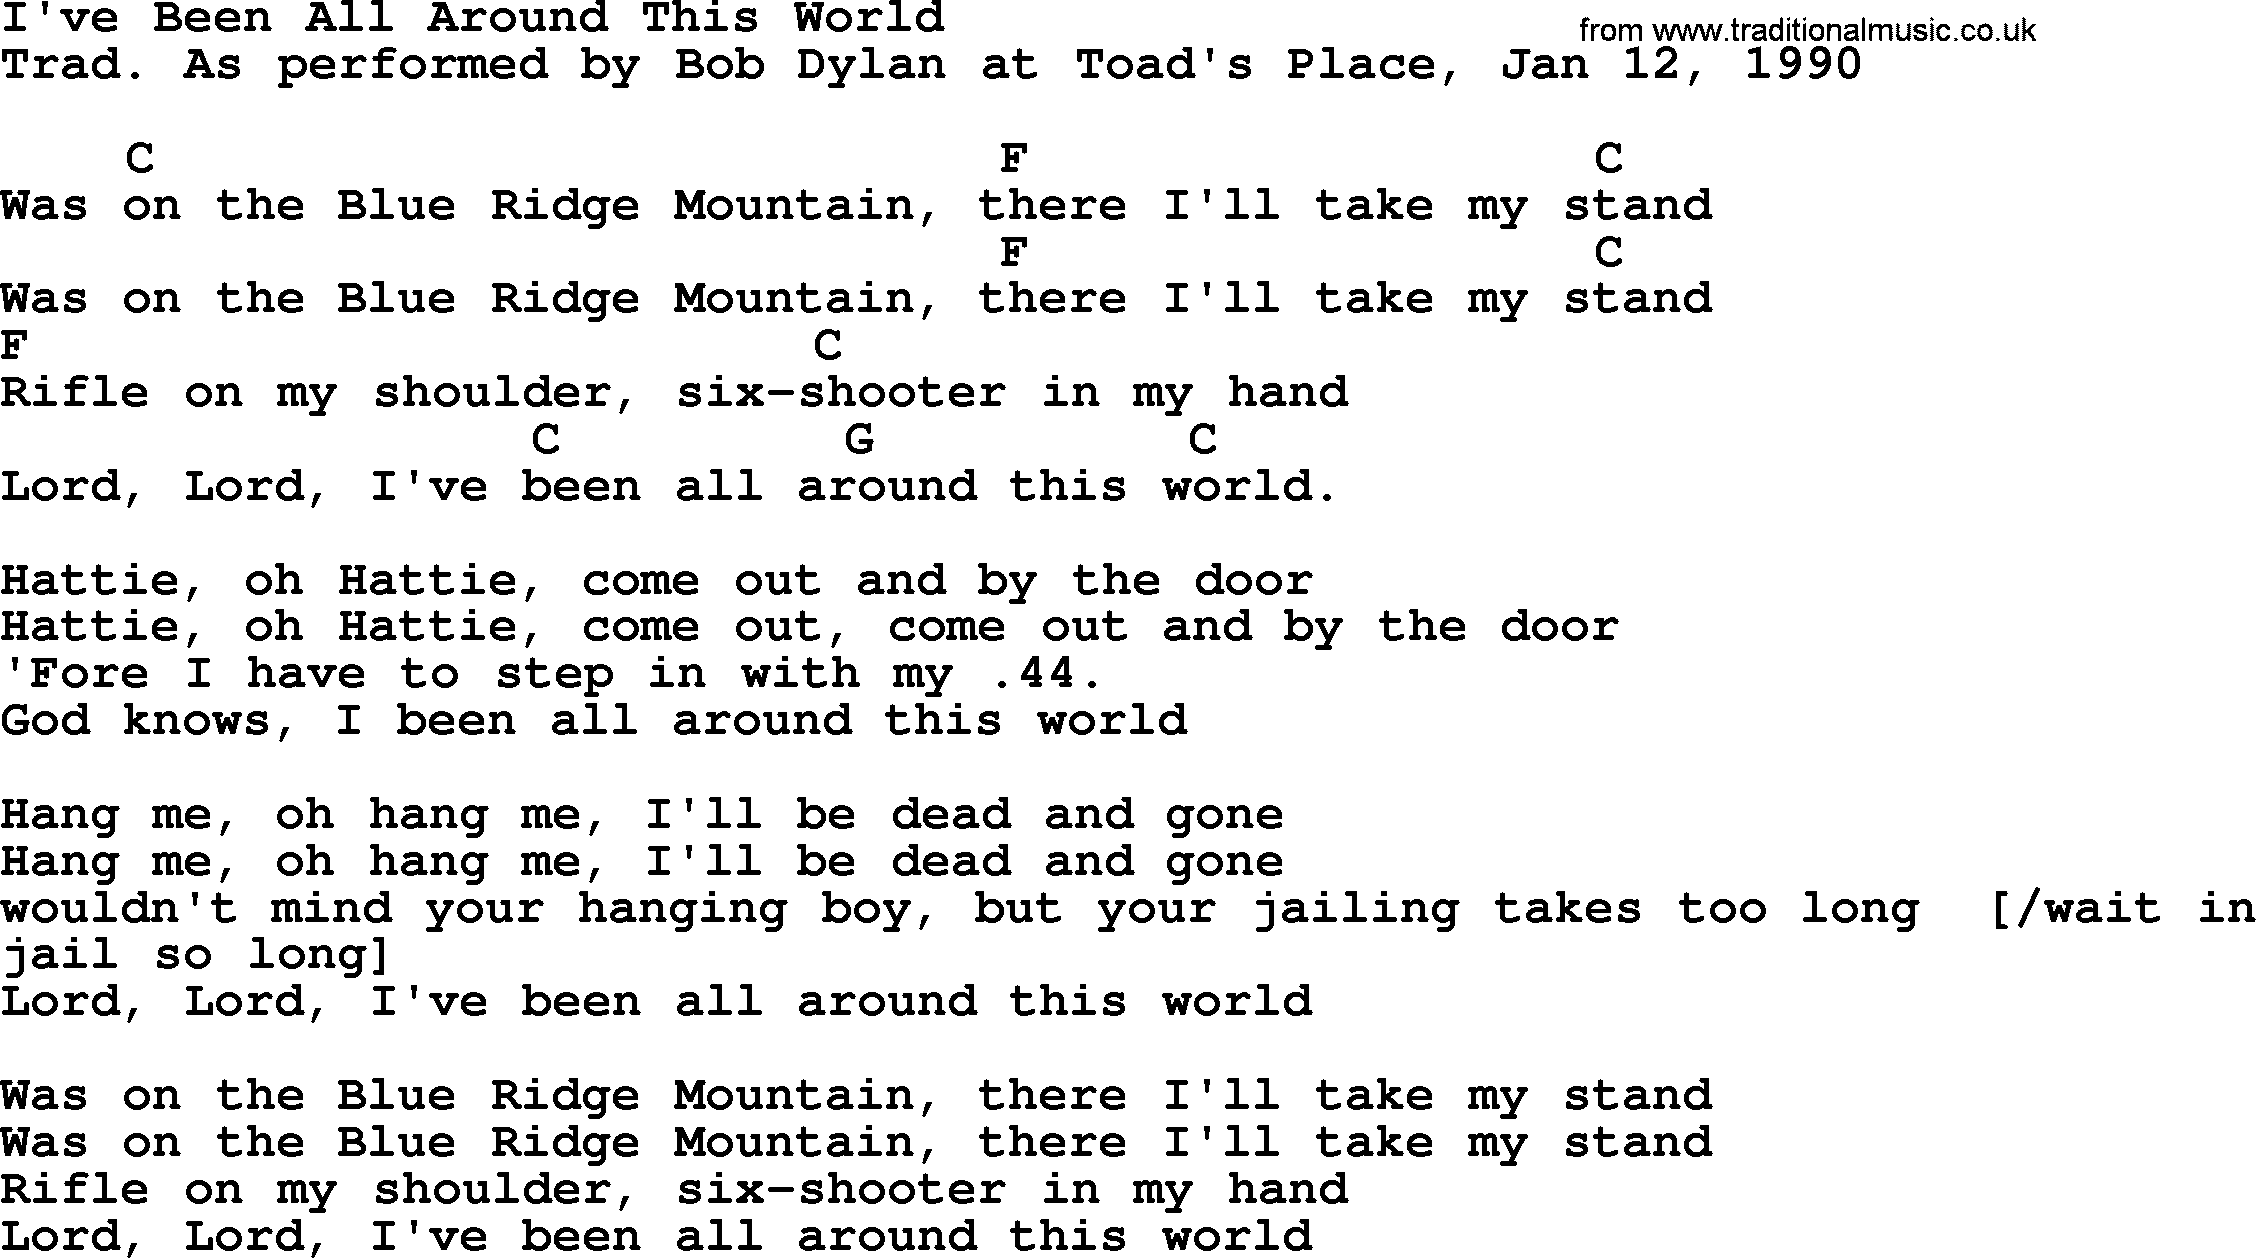 Bob Dylan song, lyrics with chords - I've Been All Around This World